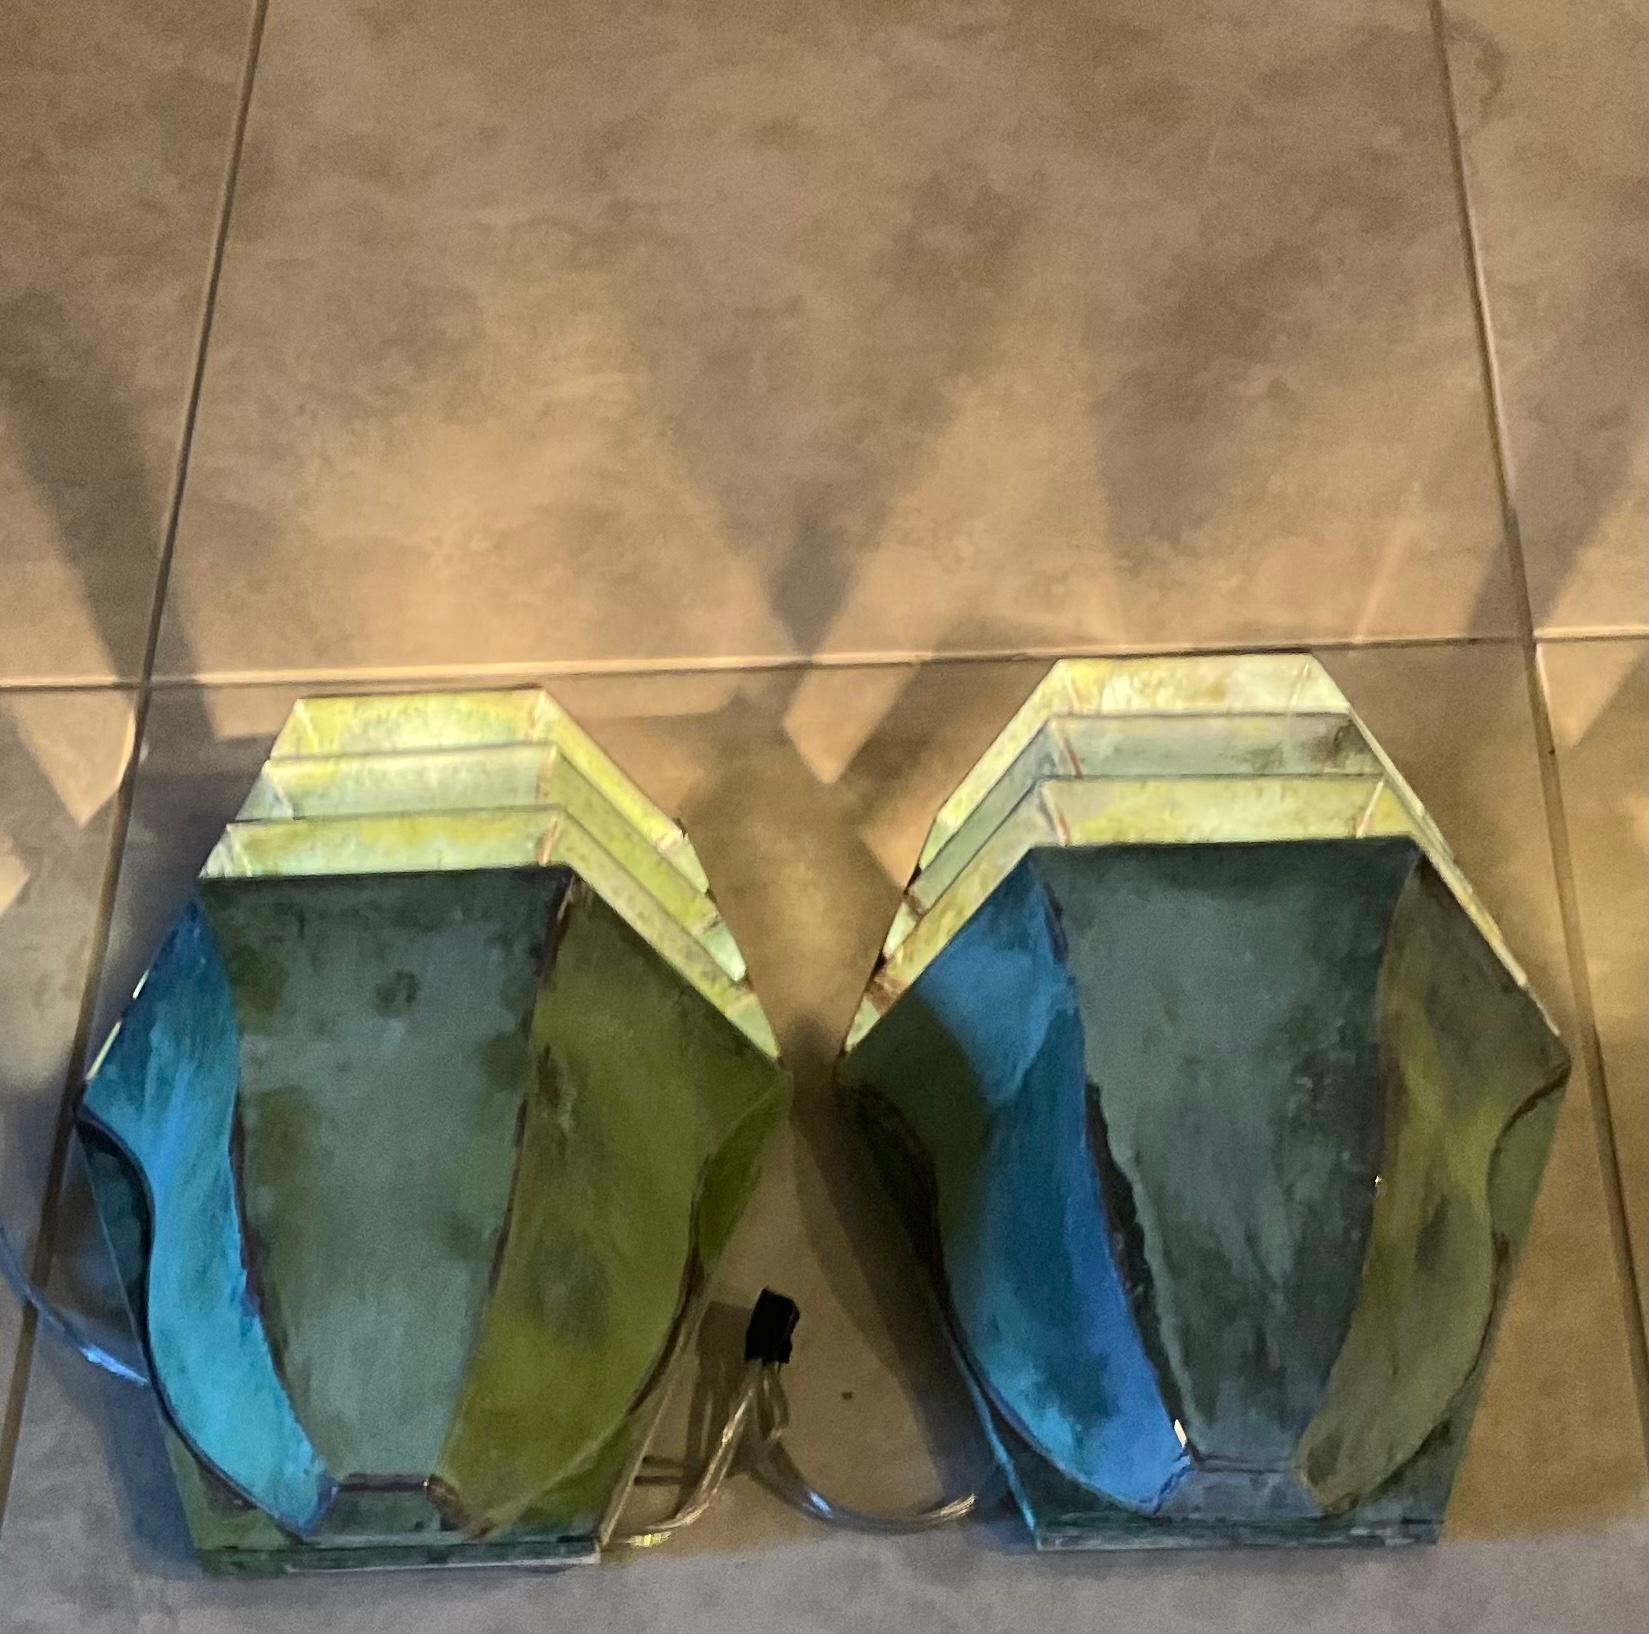 Pair of elegant wall sconces hand crafted from solid brass beautiful patina, with one 60/watt light each, projecting the light upward, great decorative fixture for any location indoor. Not suitable for wet locations.
